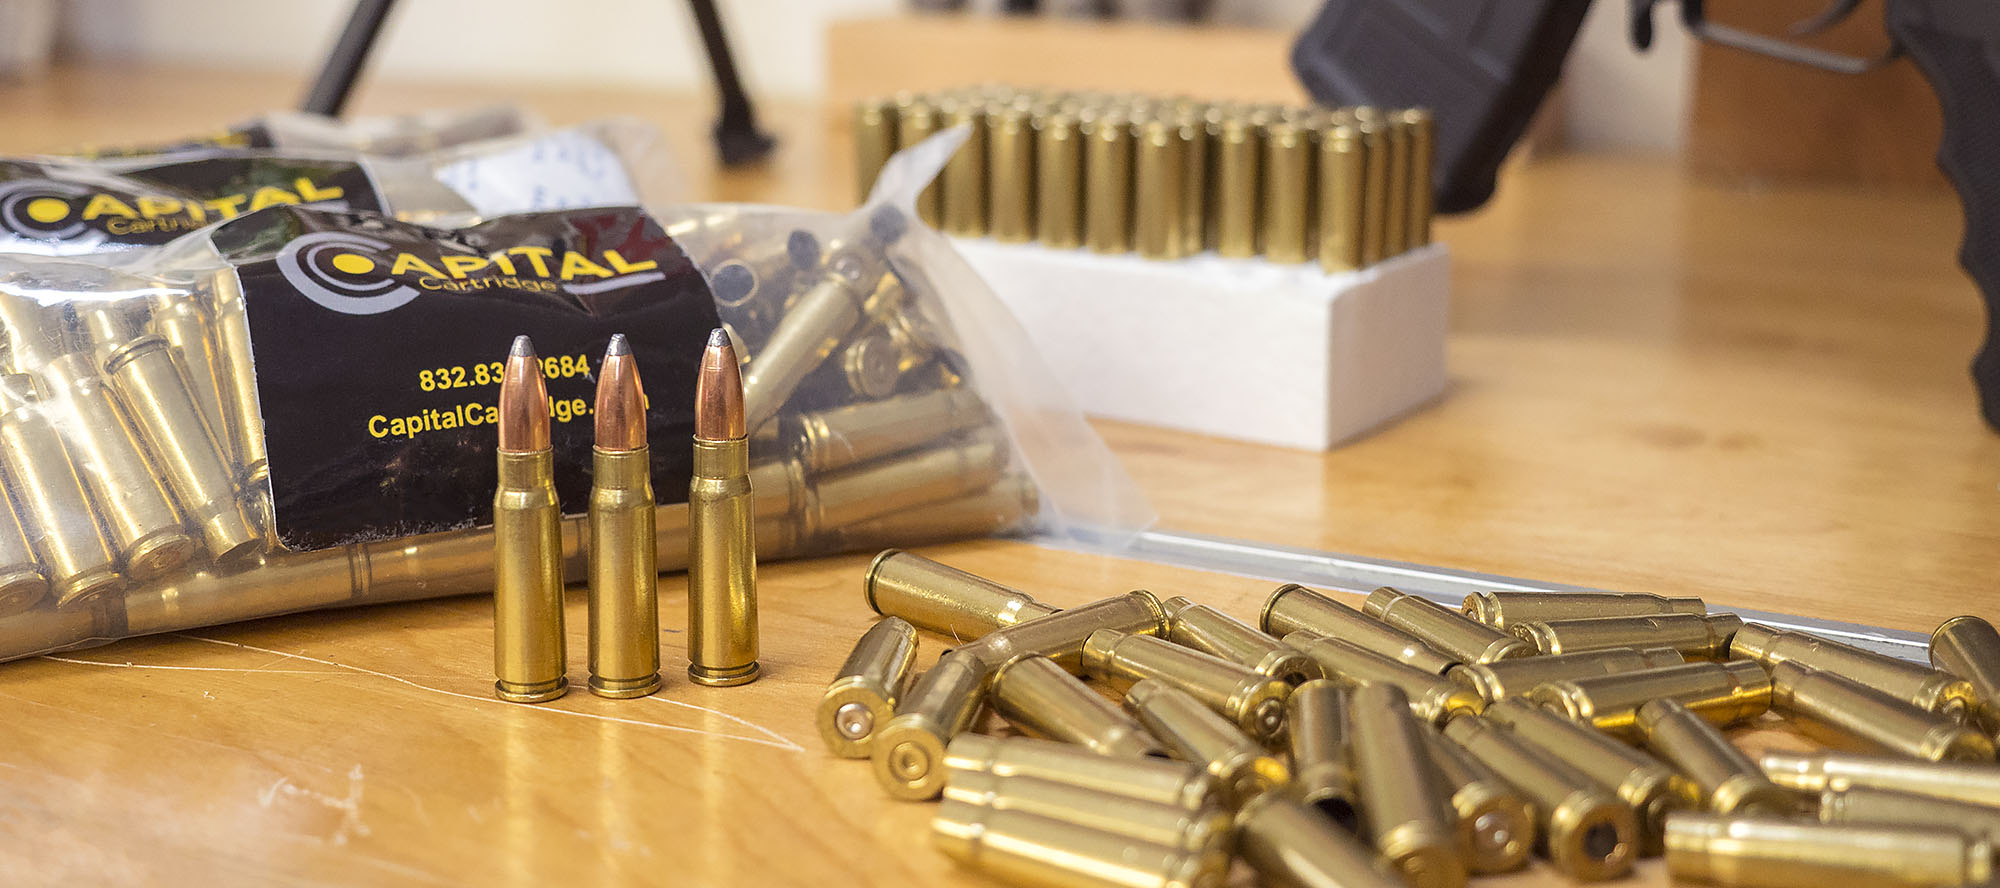 Ultimate Reloader Deal: Save 10% on 7.62x39mm Brass at Capital Cartridge.